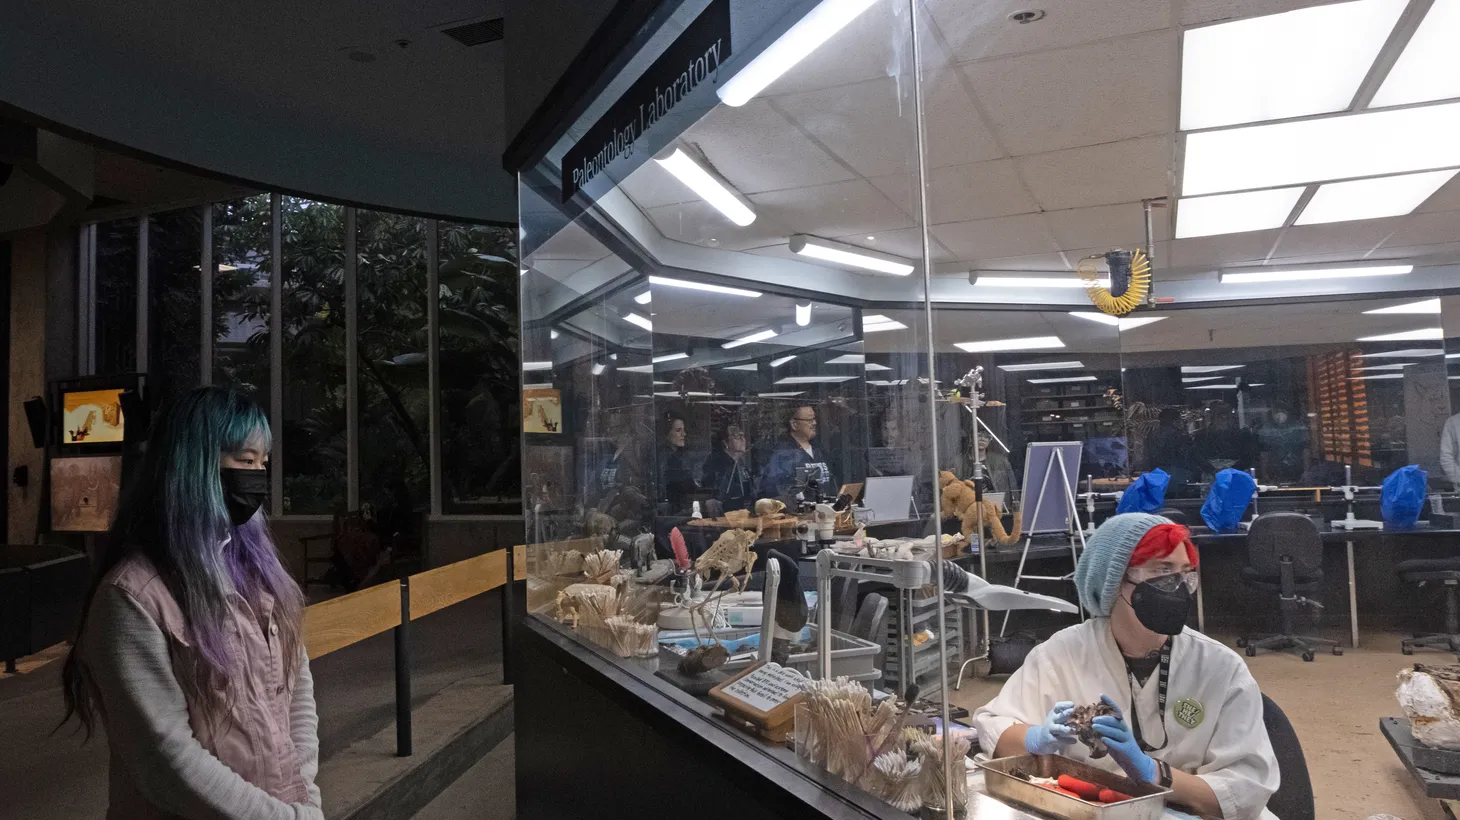 An onlooker watches as researchers examine fossil samples found in the La Brea Tar Pits.